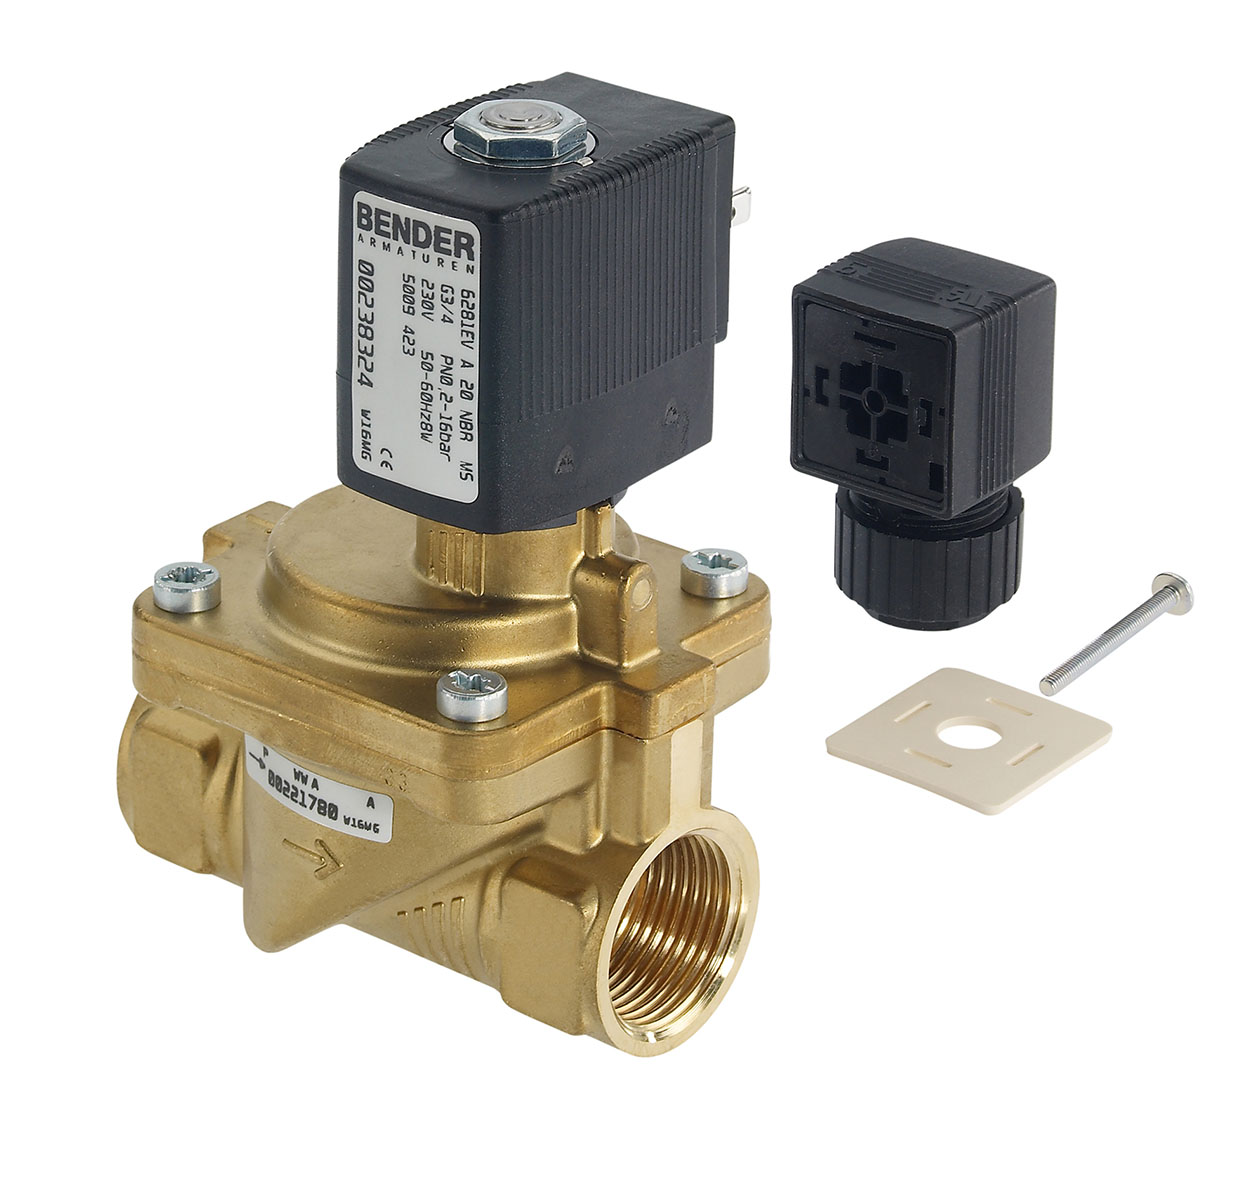 5009427 - 2/2 way solenoid valve normally closed for fluids and compressed air Type 3; female thread